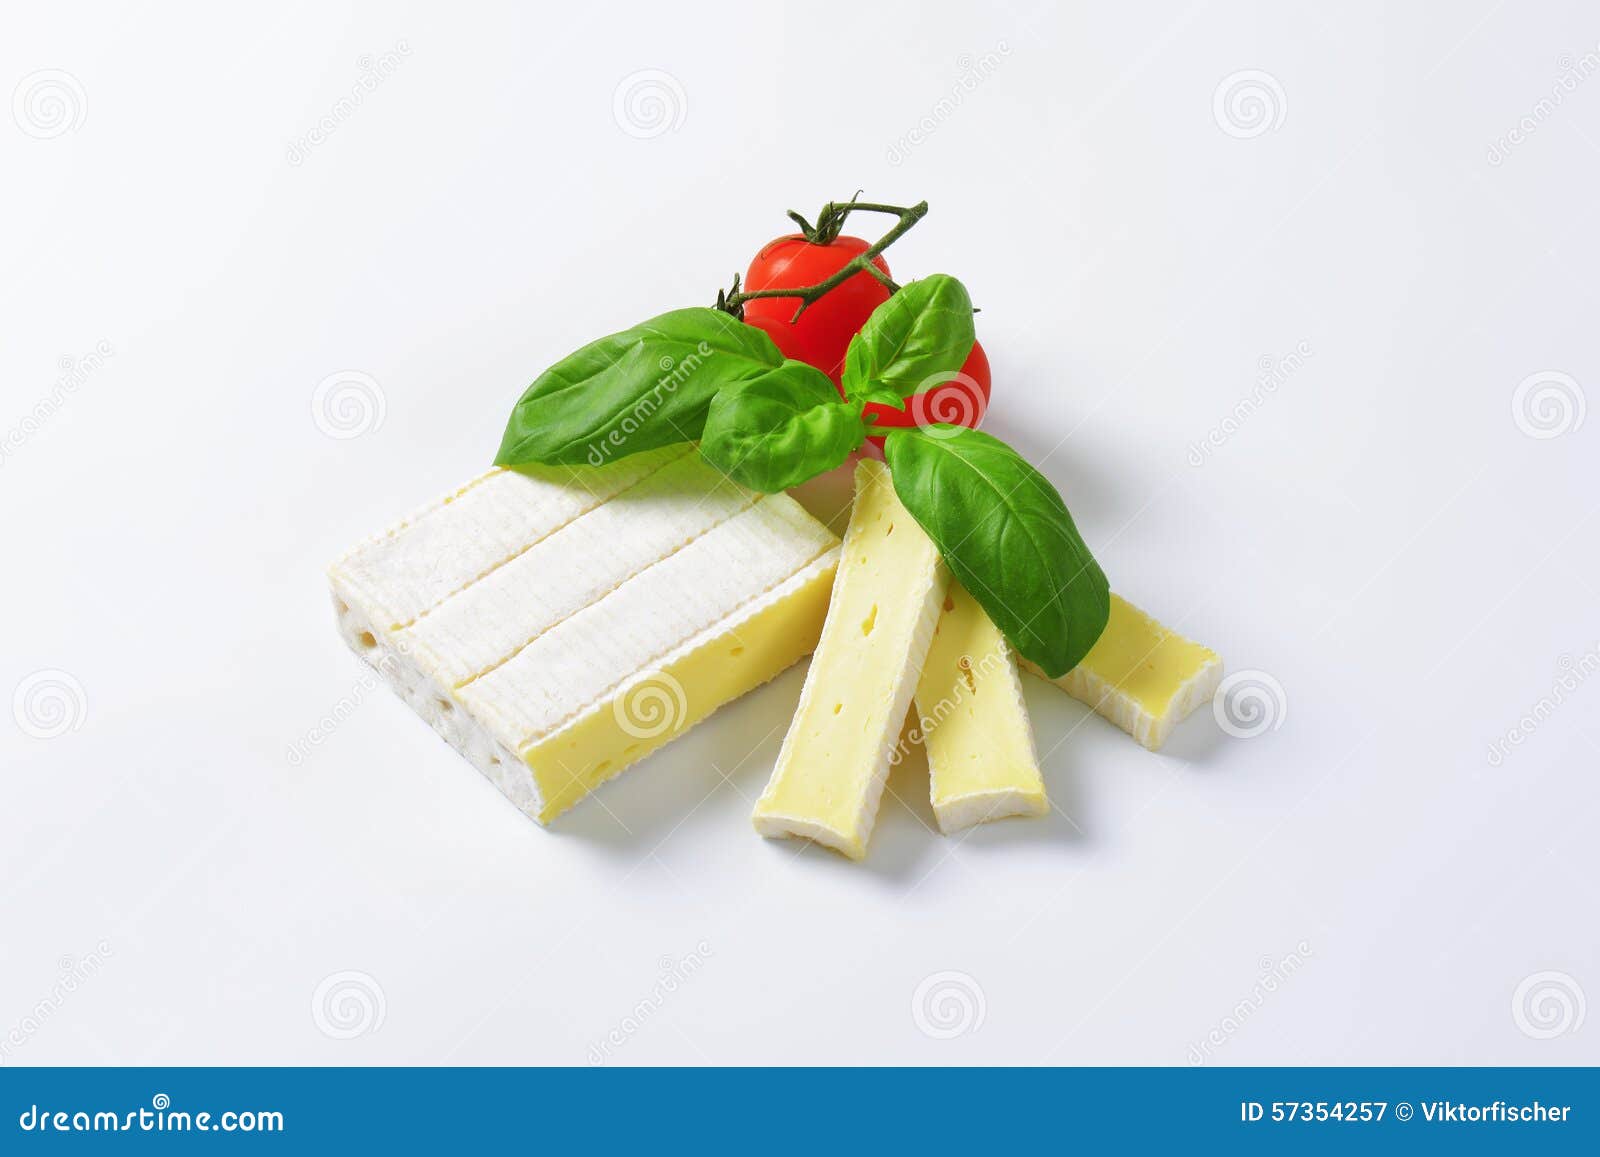 soft cheese with thin white rind